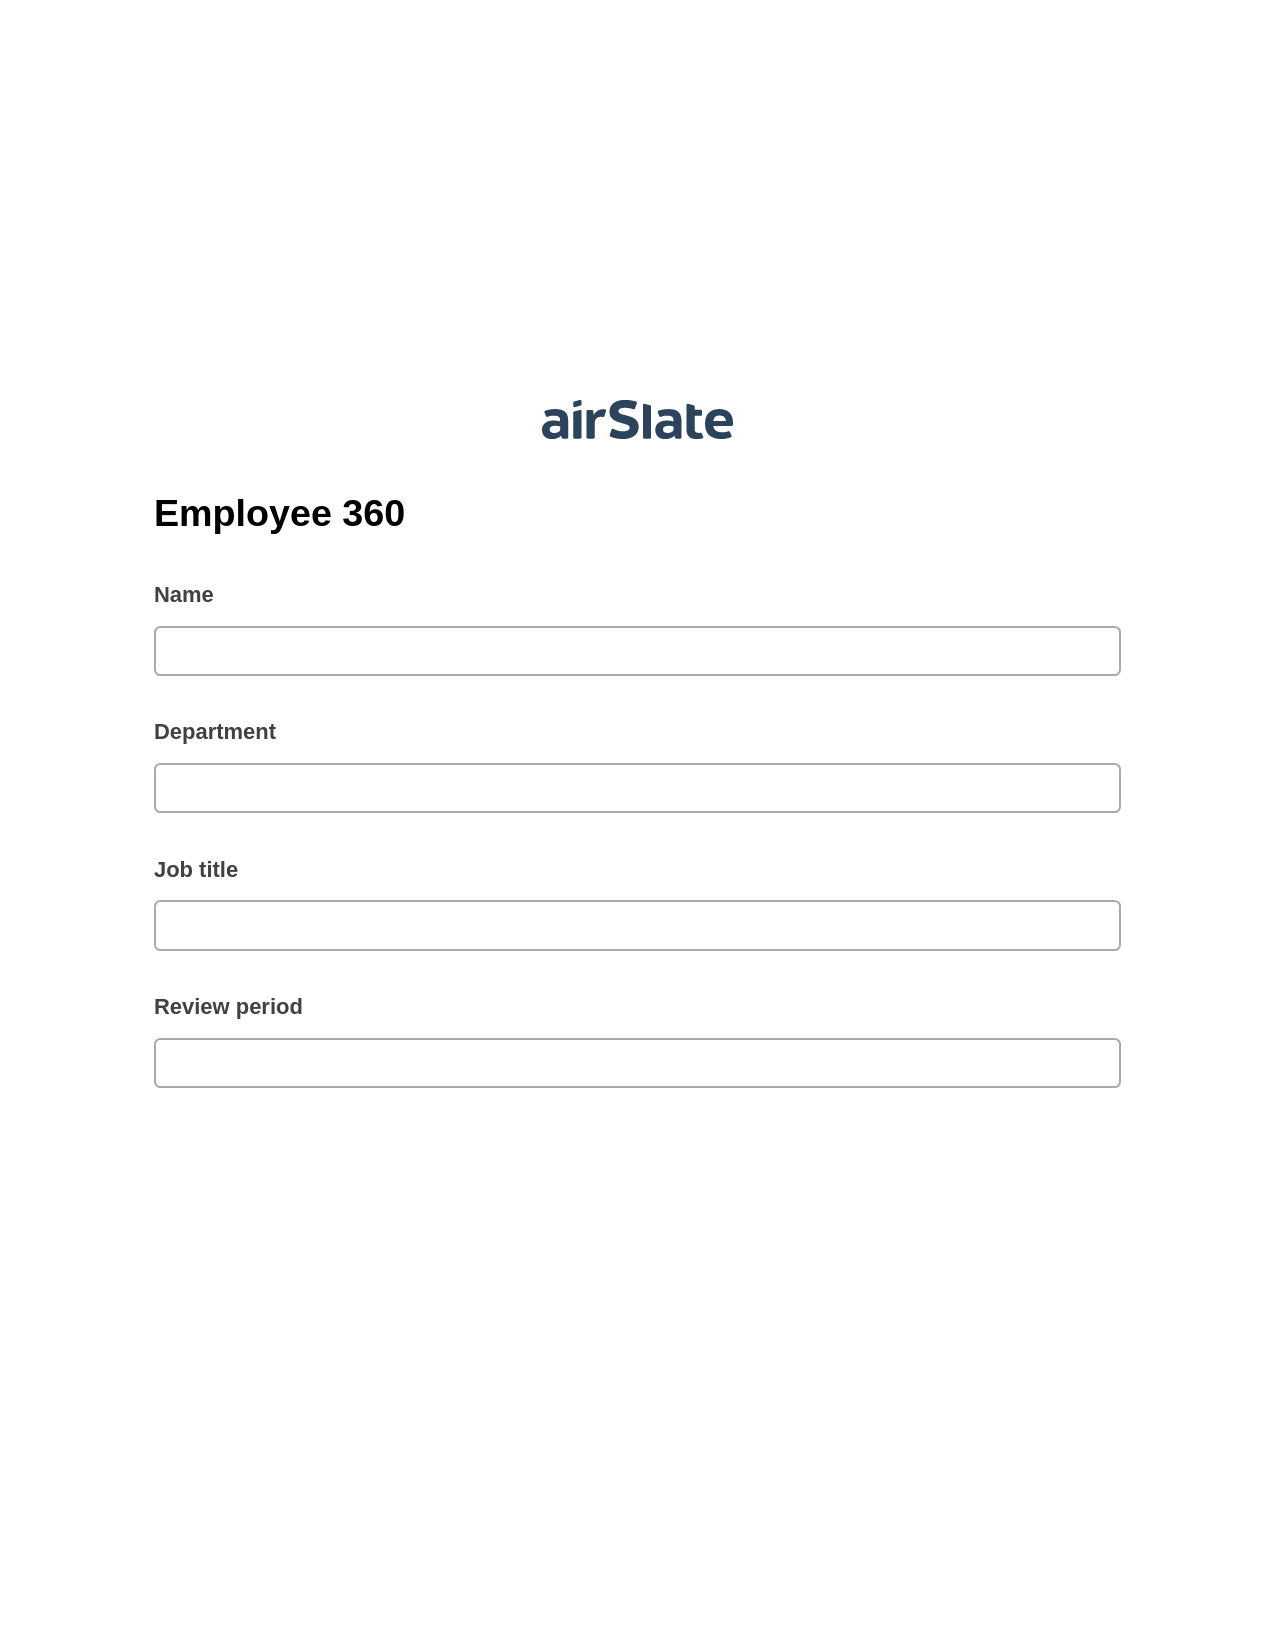 Employee 360 Pre-fill from CSV File Bot, Open under a Role Bot, Export to Salesforce Record Bot